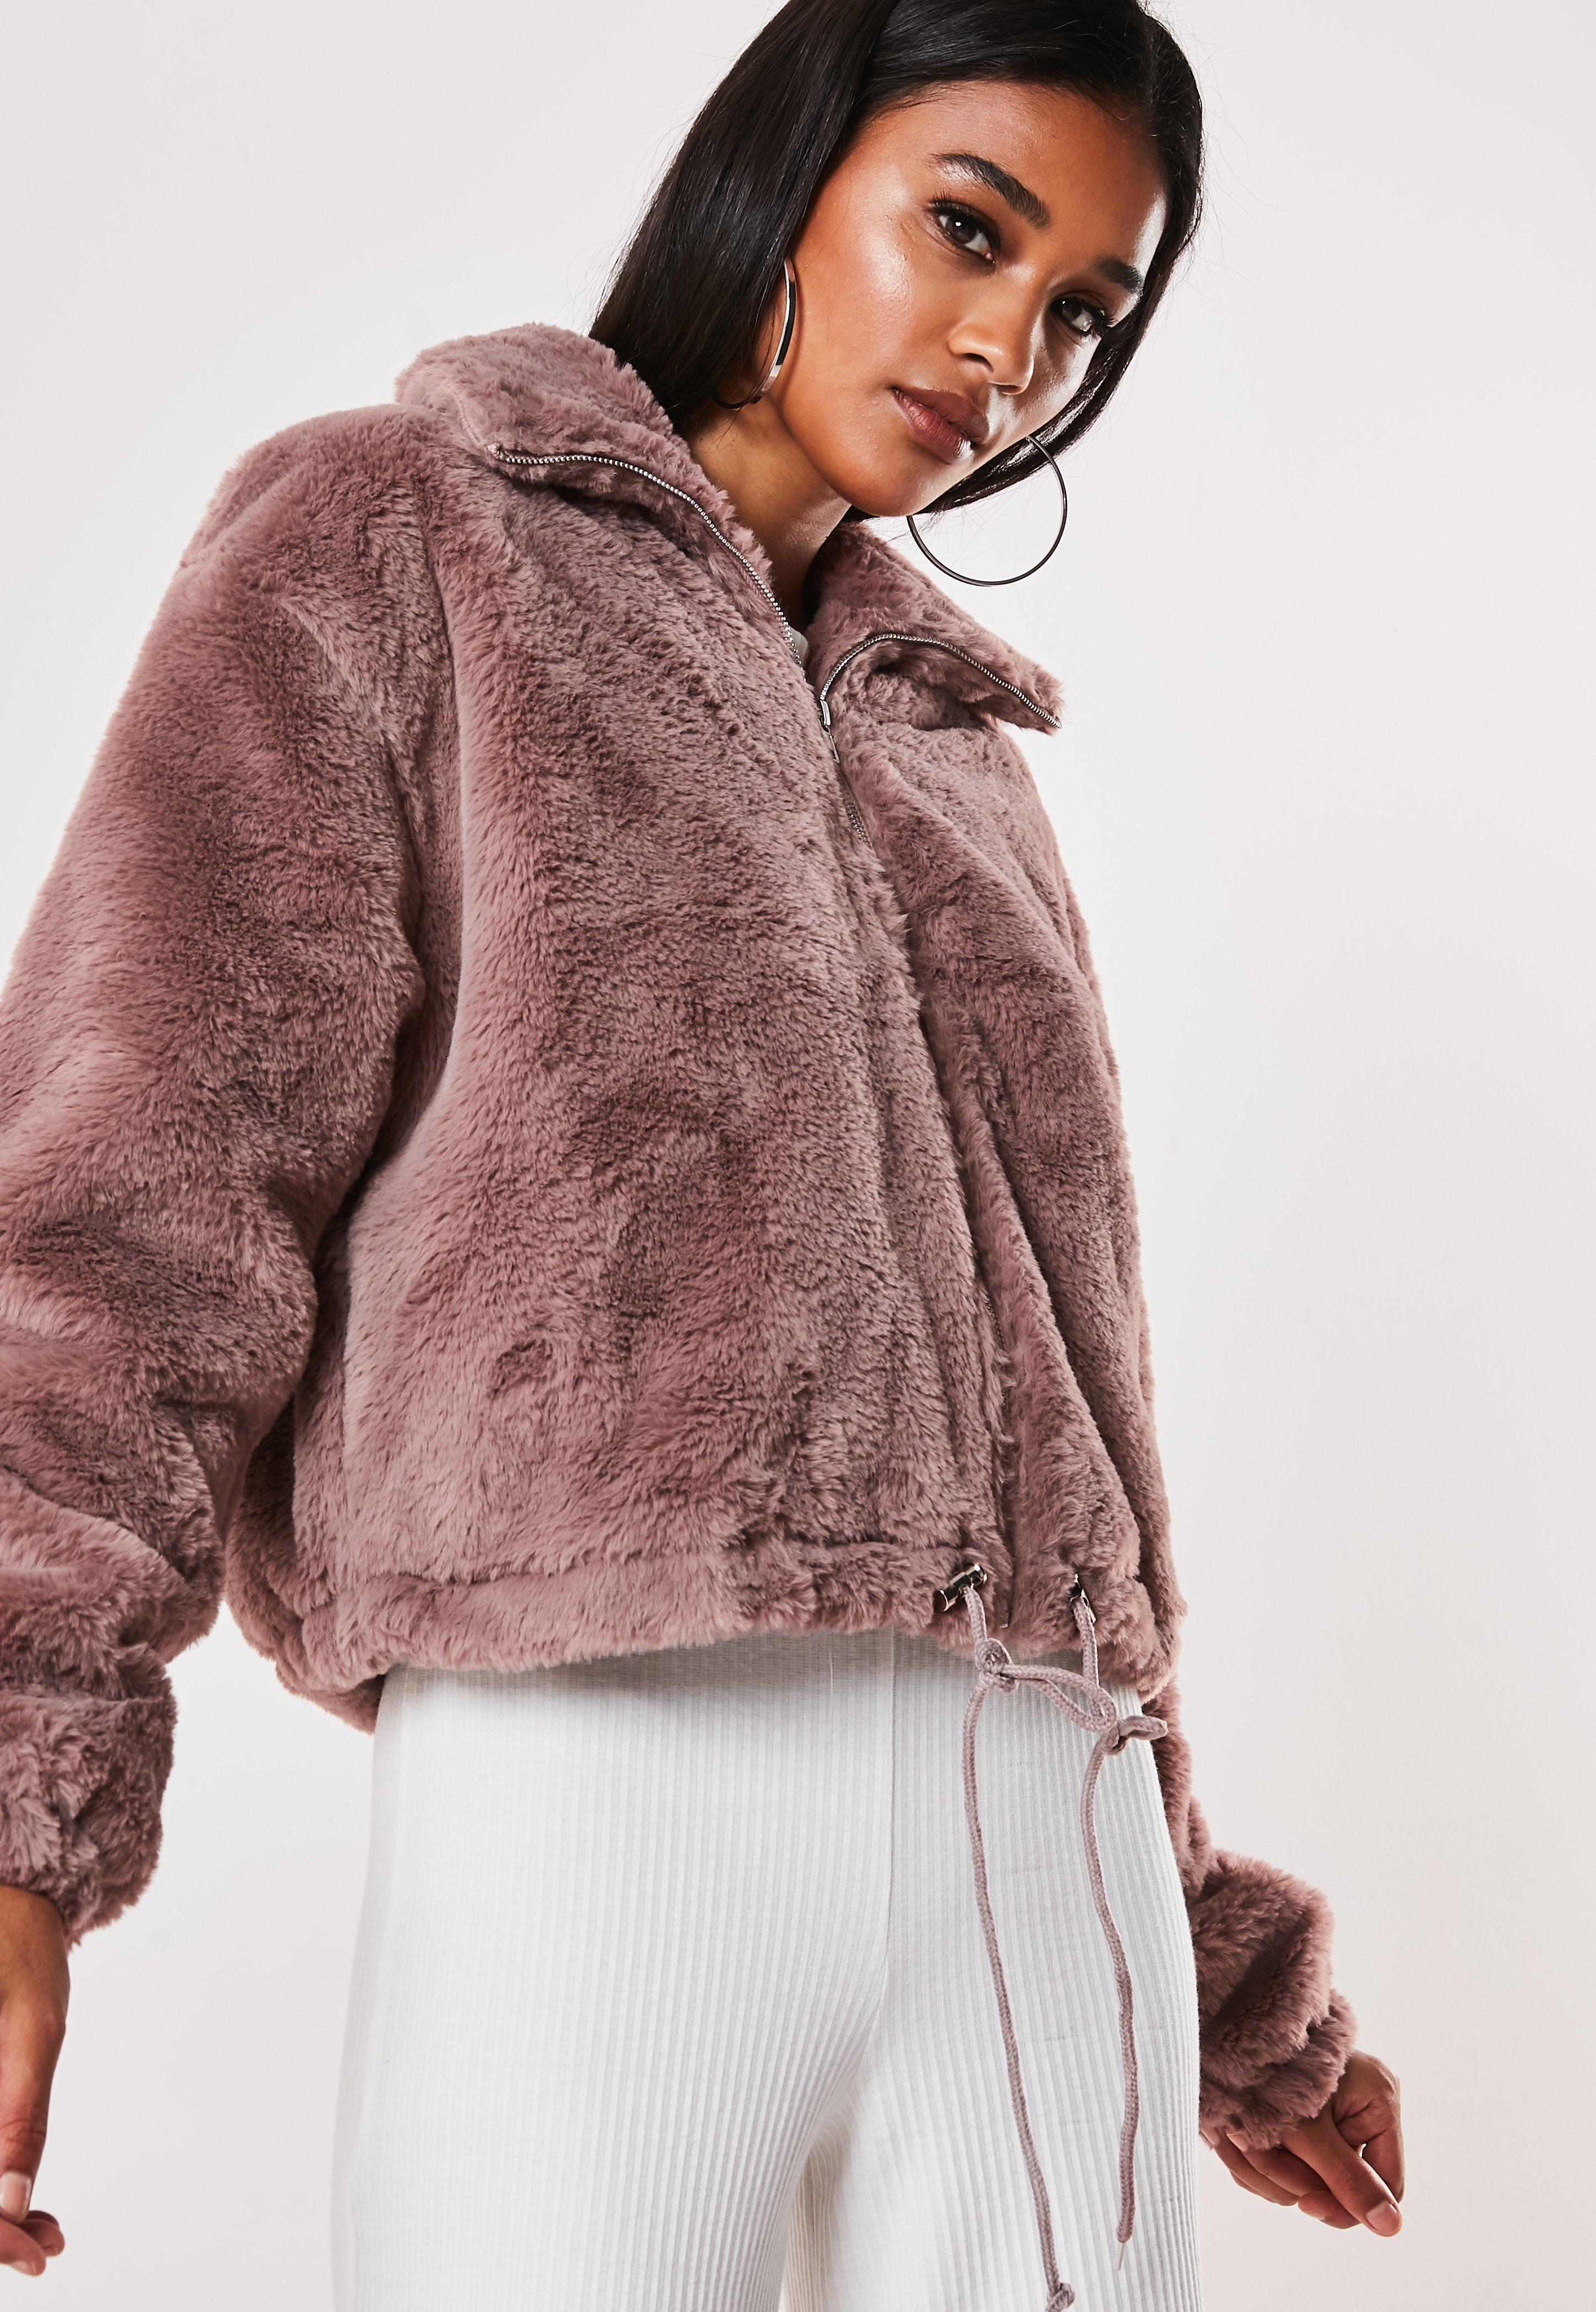 Missguided Mauve Cropped Faux Fur Bomber Jacket in Purple - Lyst